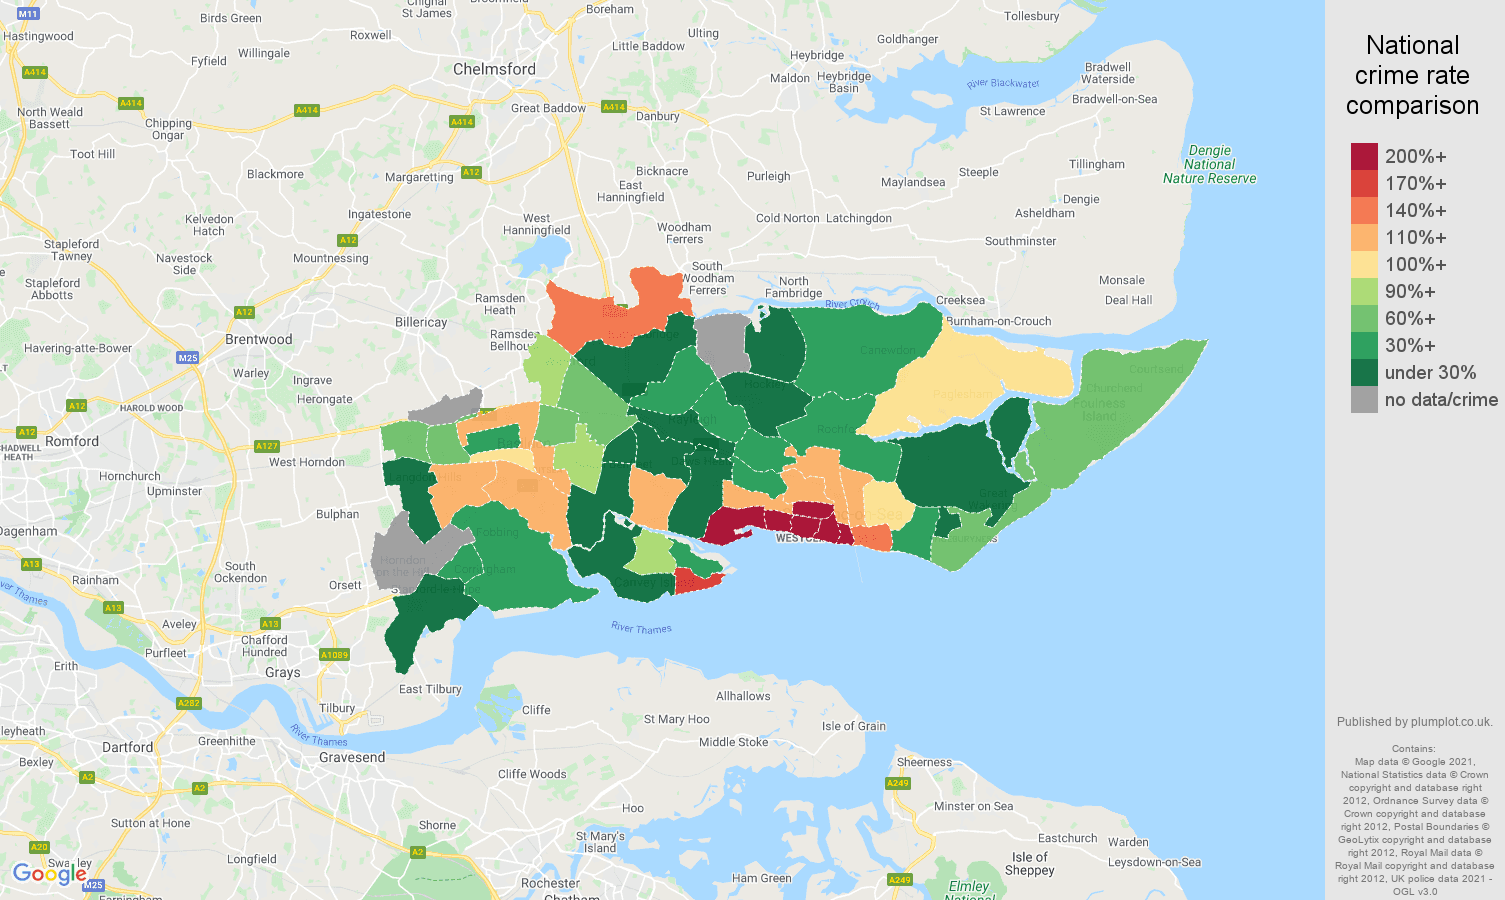 Southend on Sea bicycle theft crime rate comparison map